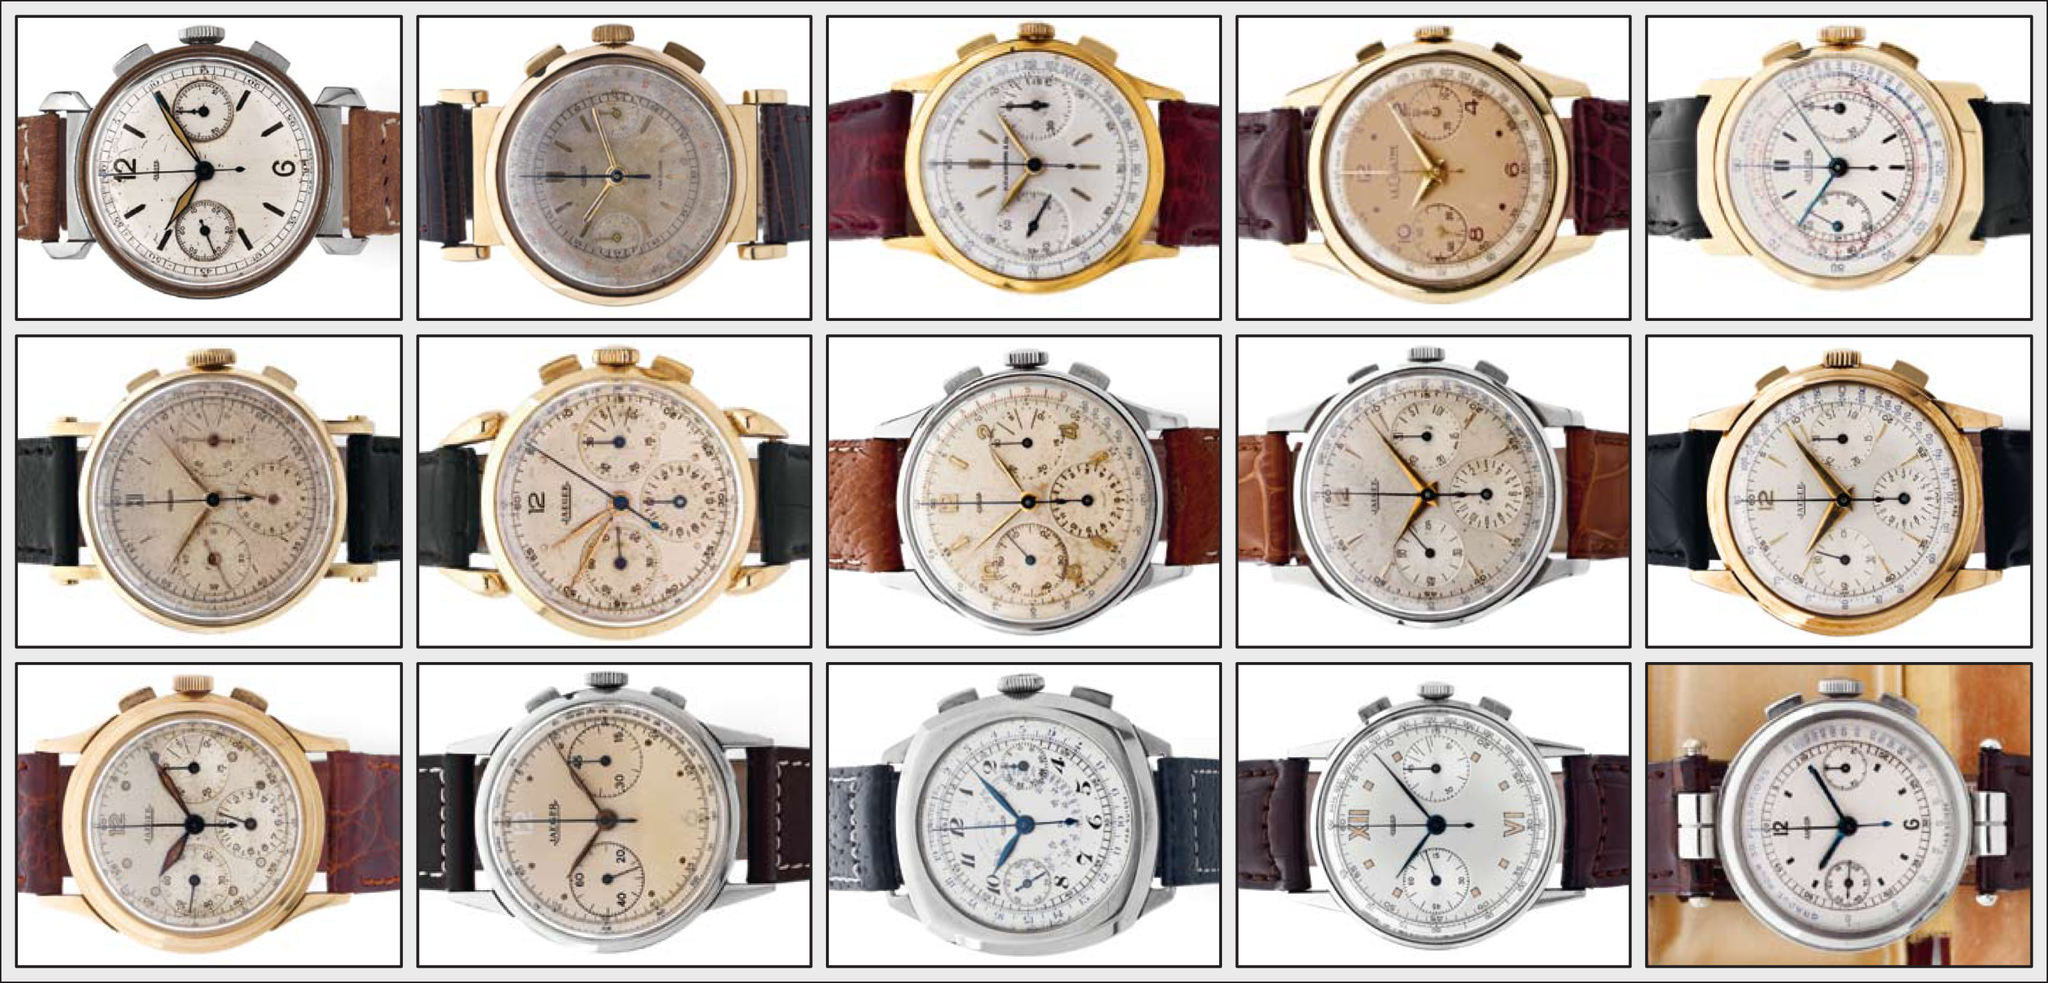 Jaeger and LeCoultre vintage chronograph watches offered at the 2011 JLC themed Artcurial auction